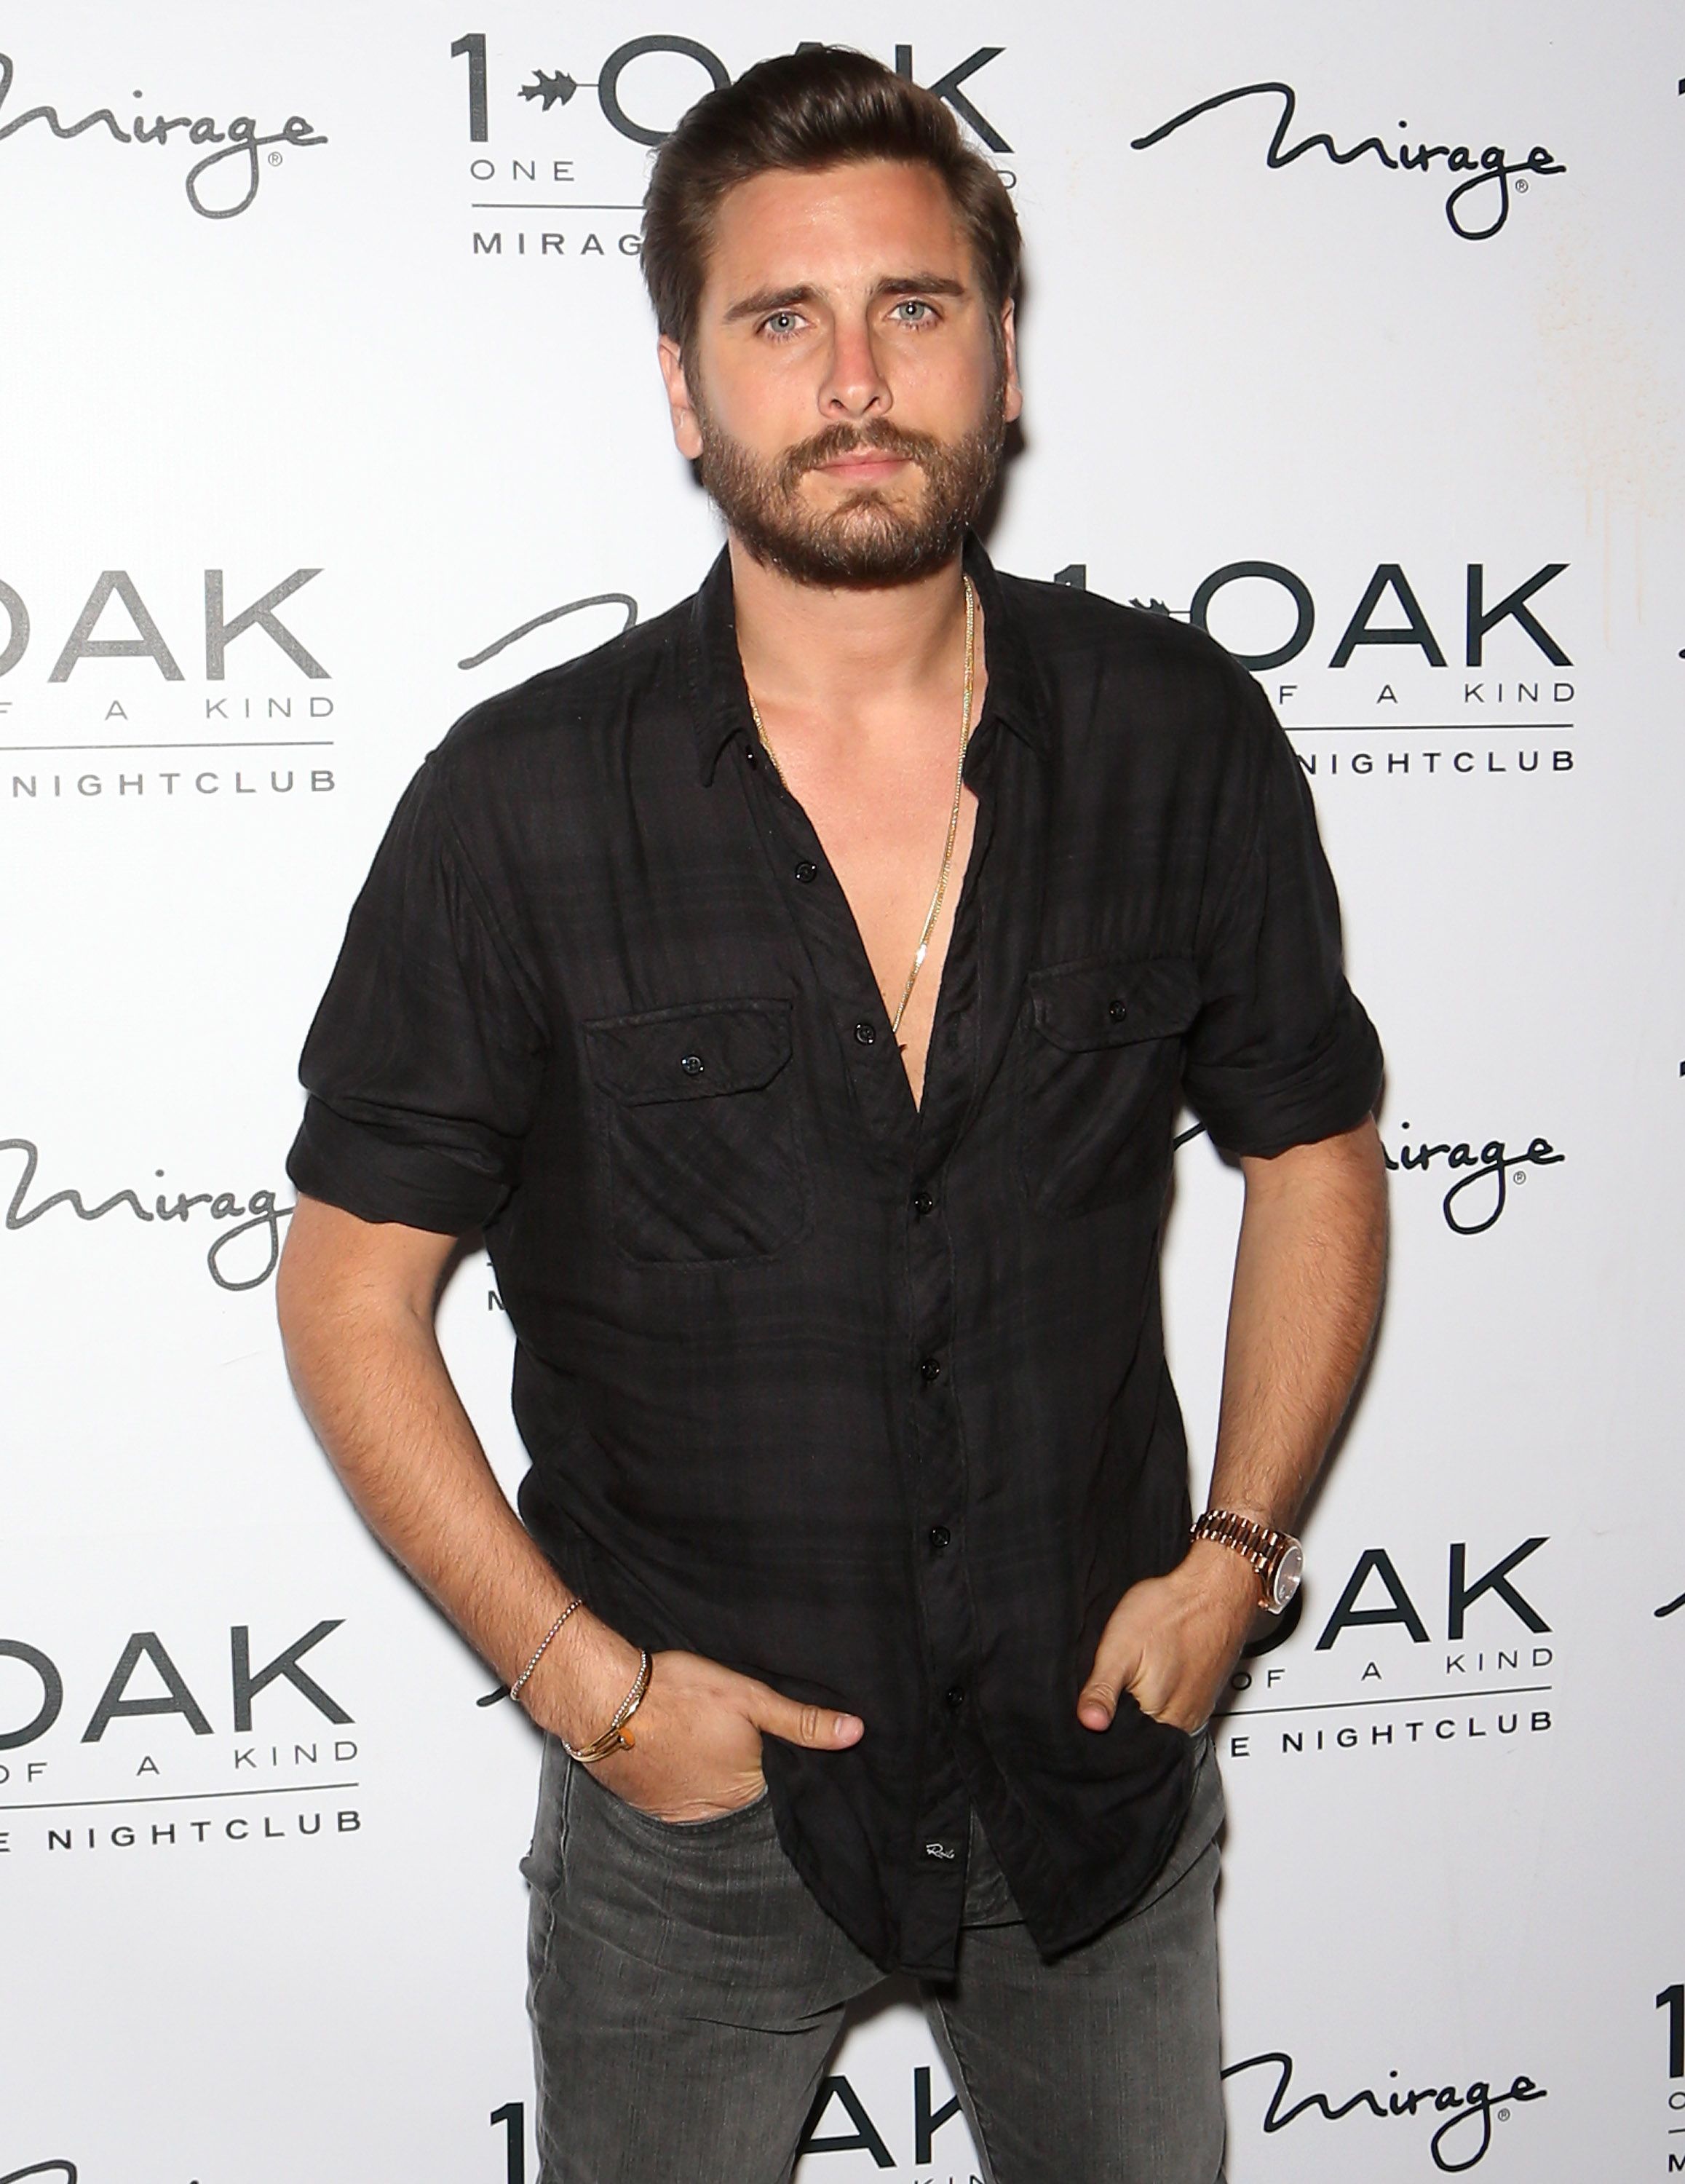 Blonde Scott Disick Is Trolled For Trying To Be 'Edgy' Like Kourtney's New  Boyfriend